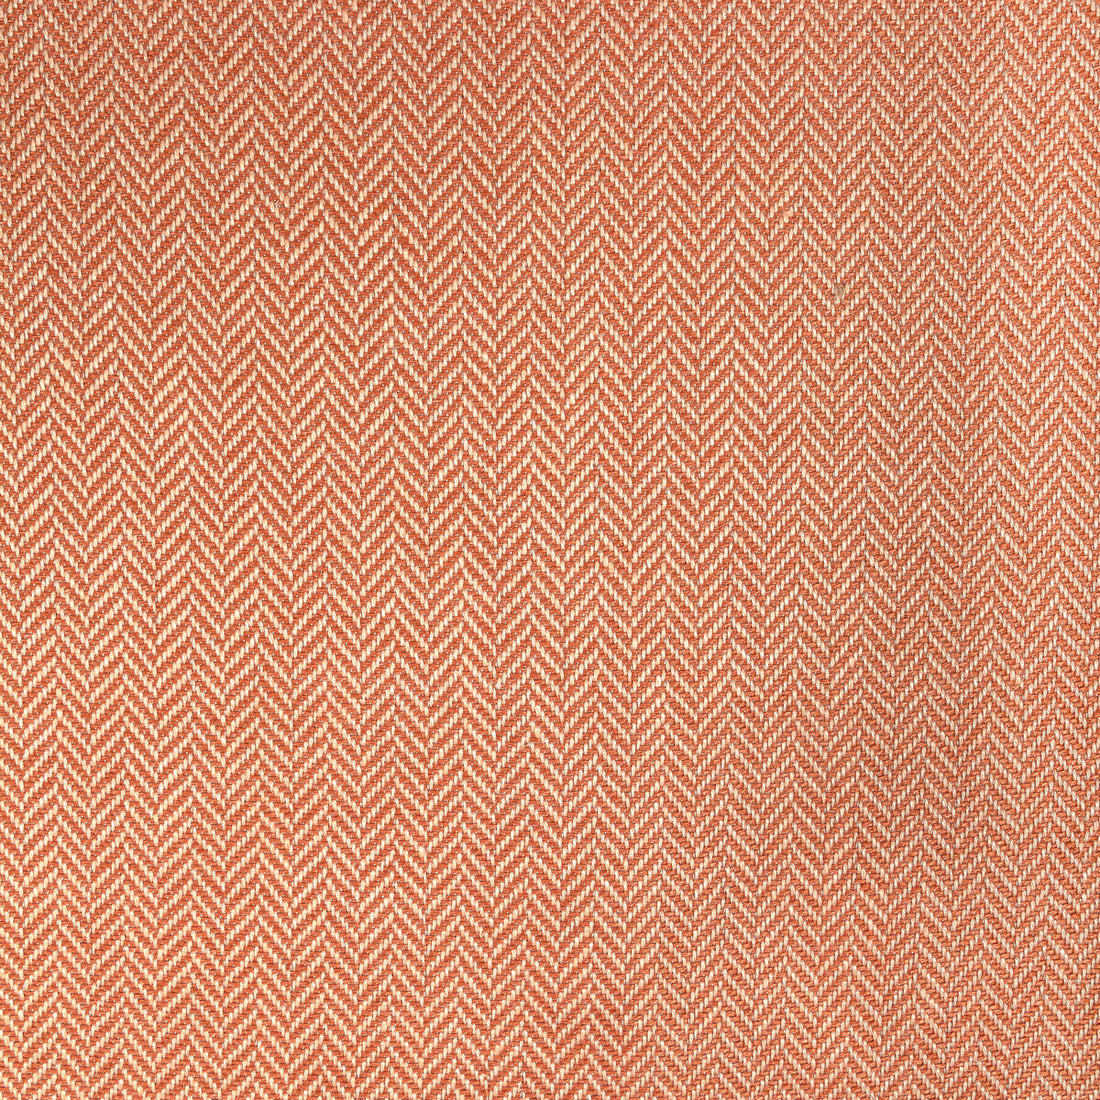 Kerolay Linen Weave fabric in apricot color - pattern 8022107.12.0 - by Brunschwig &amp; Fils in the Lorient Weaves collection